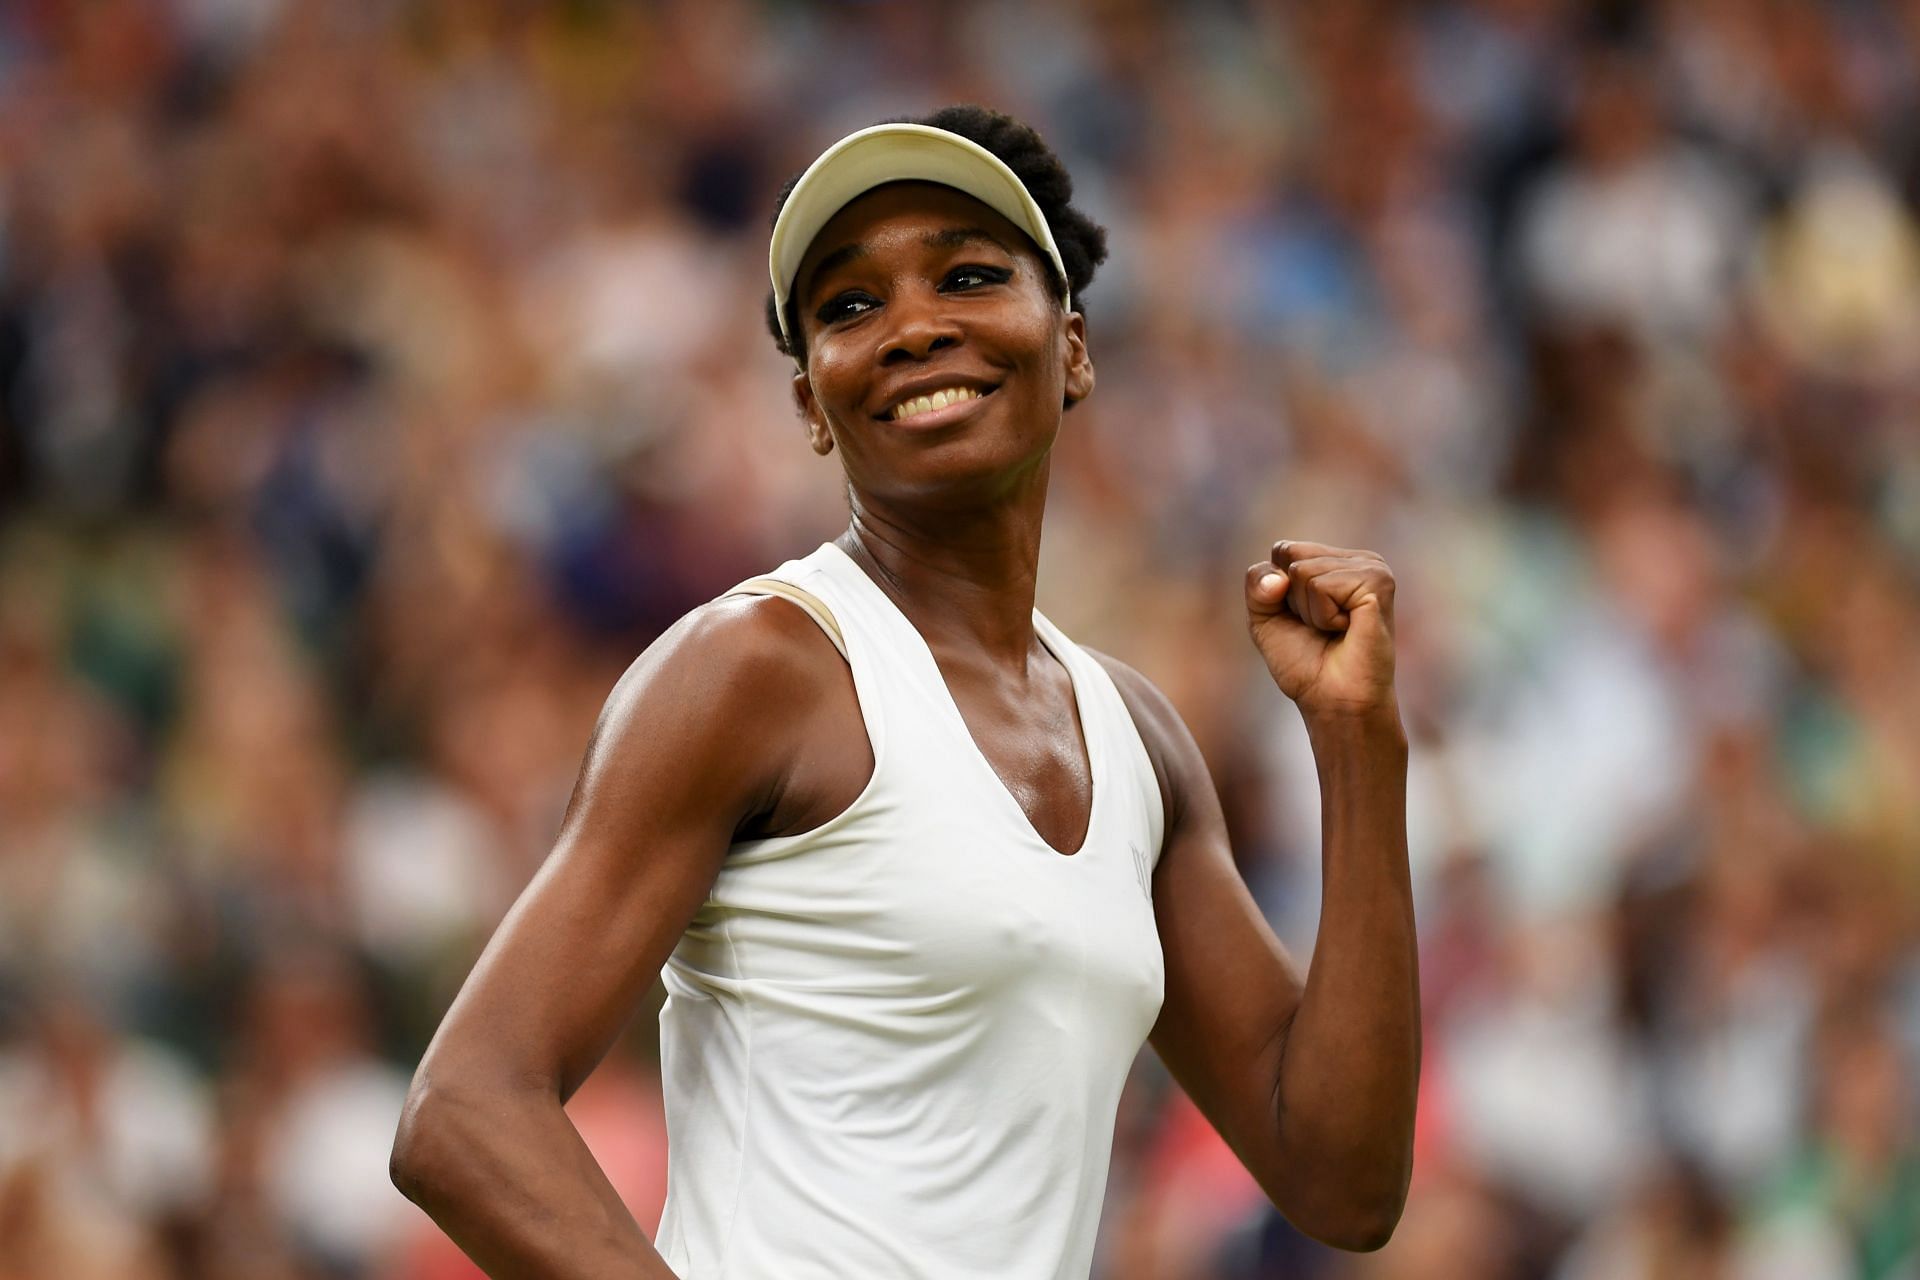 Williams has tumbled to World No. 532 in the WTA rankings